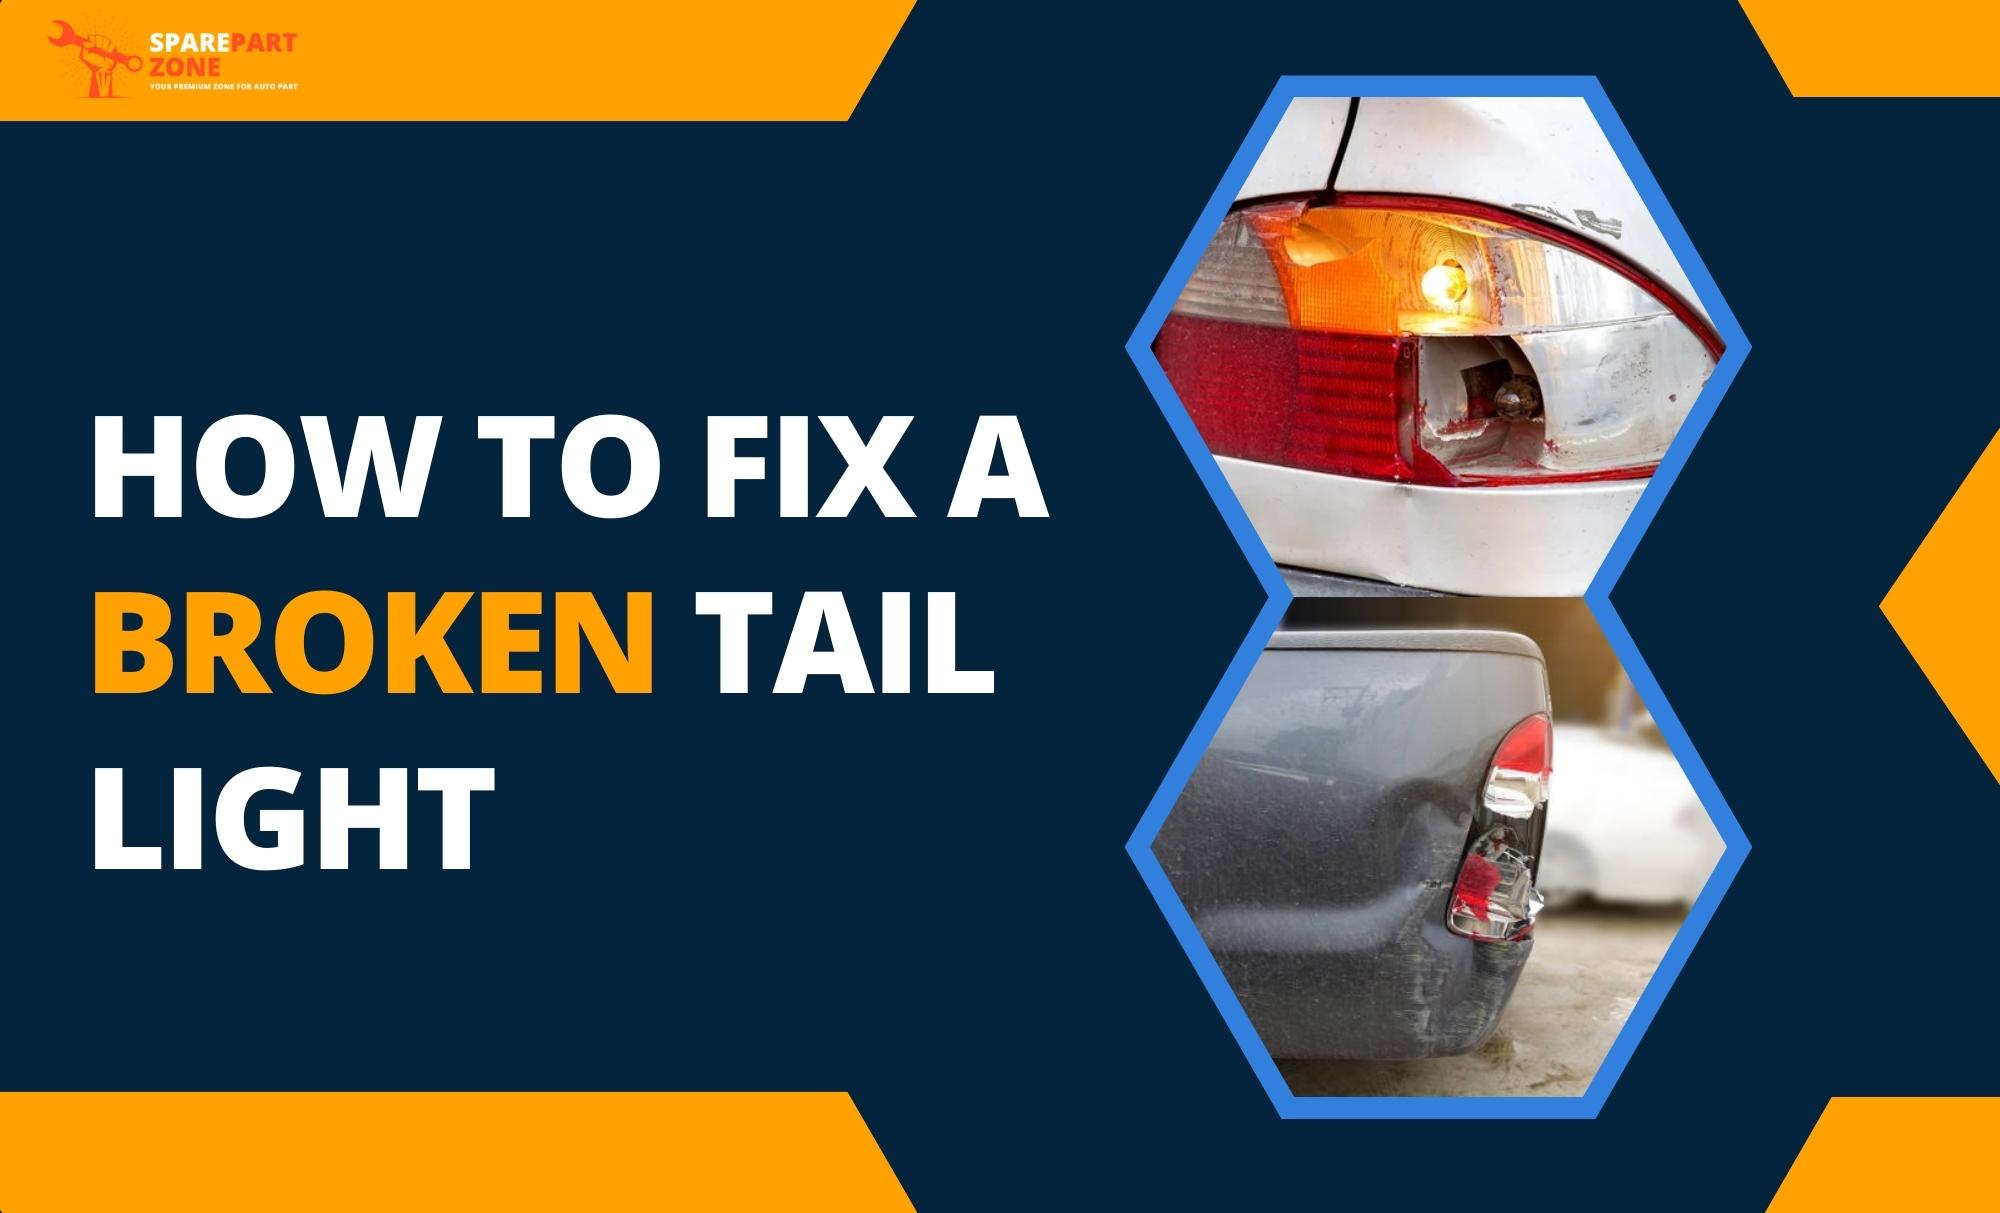 Did You Know You Can Fix Broken Tail Light & Its Repair Cost